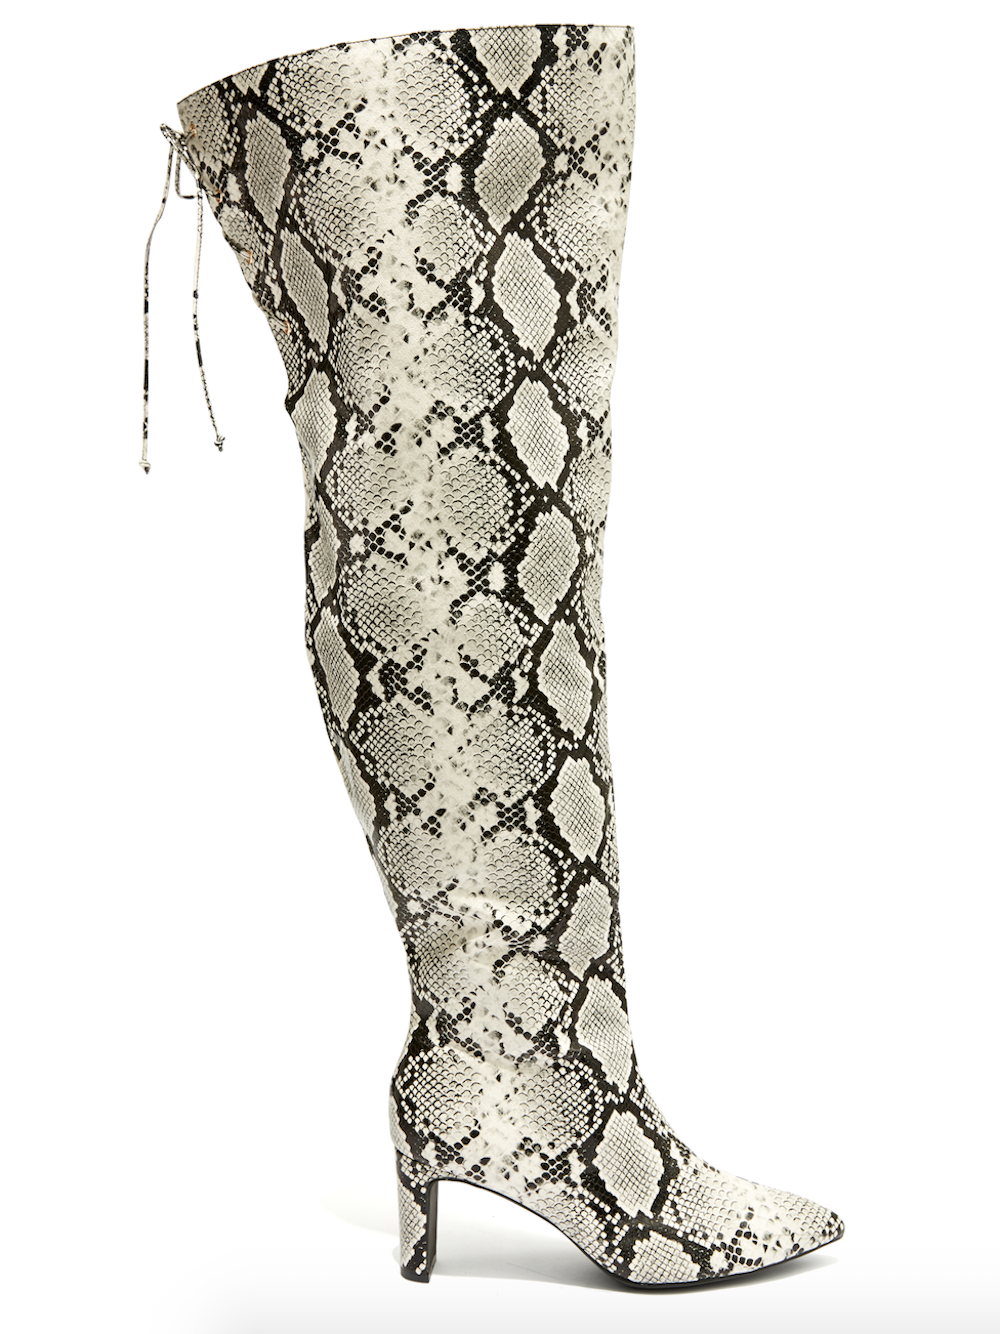 Can't Tell Me Nothin Faux-Snake Thigh High Boots